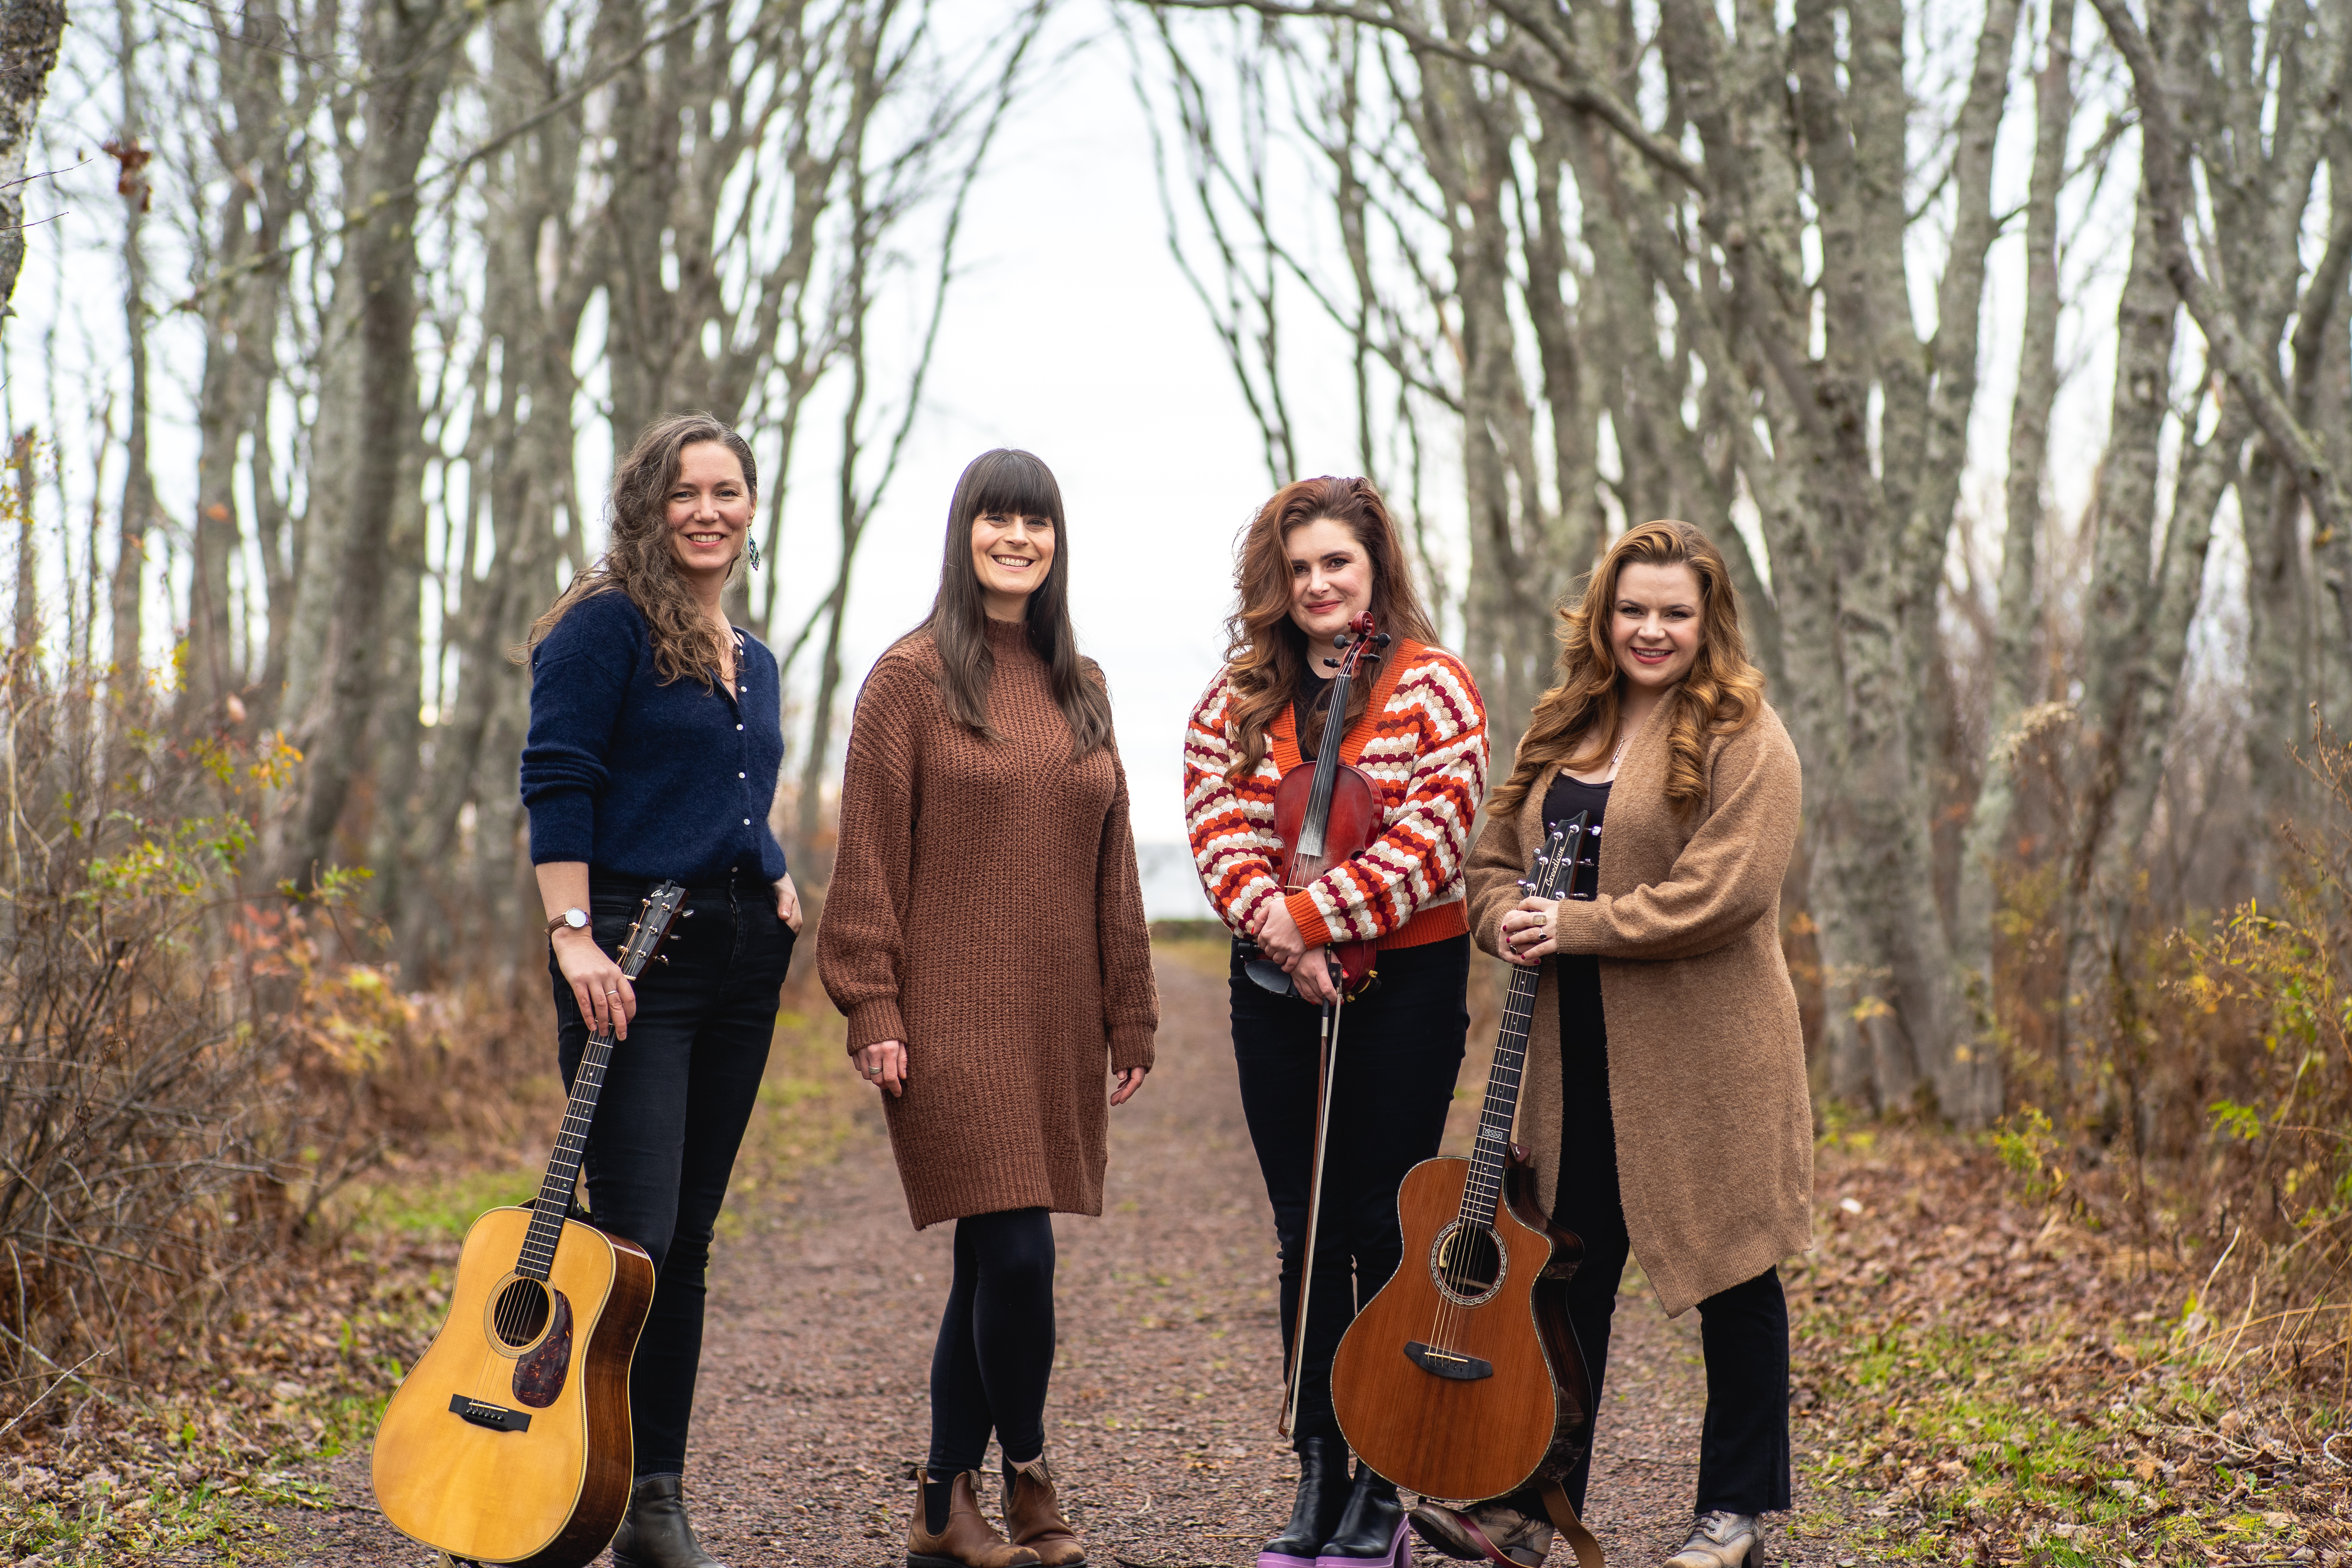 Saltwater songs poses on a trail in the woods. The four women are wearing browns and two of them are holding guitars